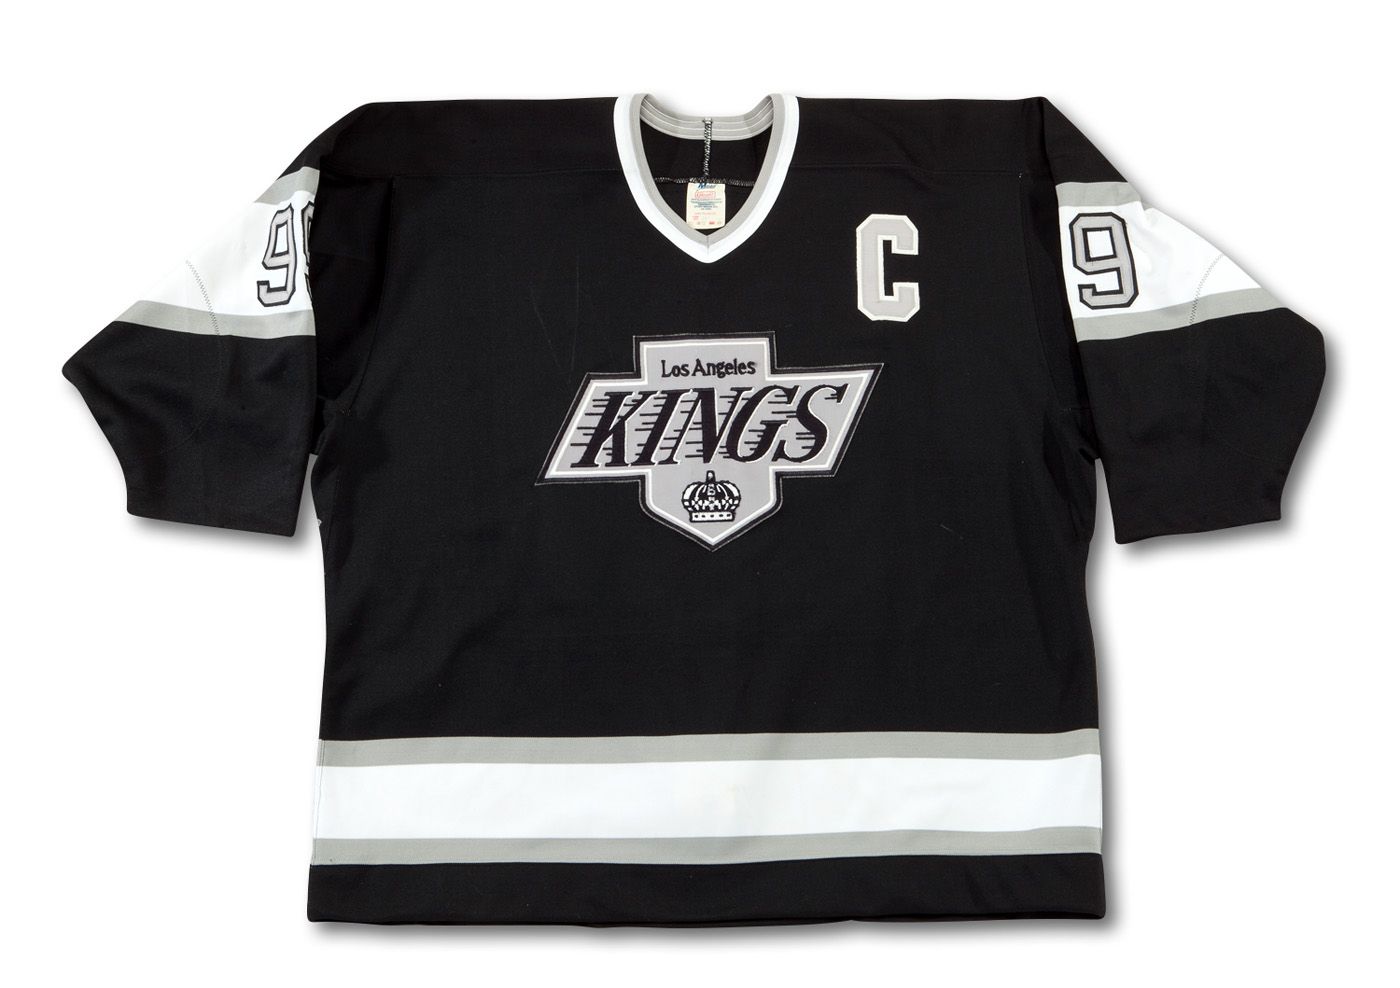 Sell a Wayne Gretzky Game Used Worn Kings Jersey with Team Letter